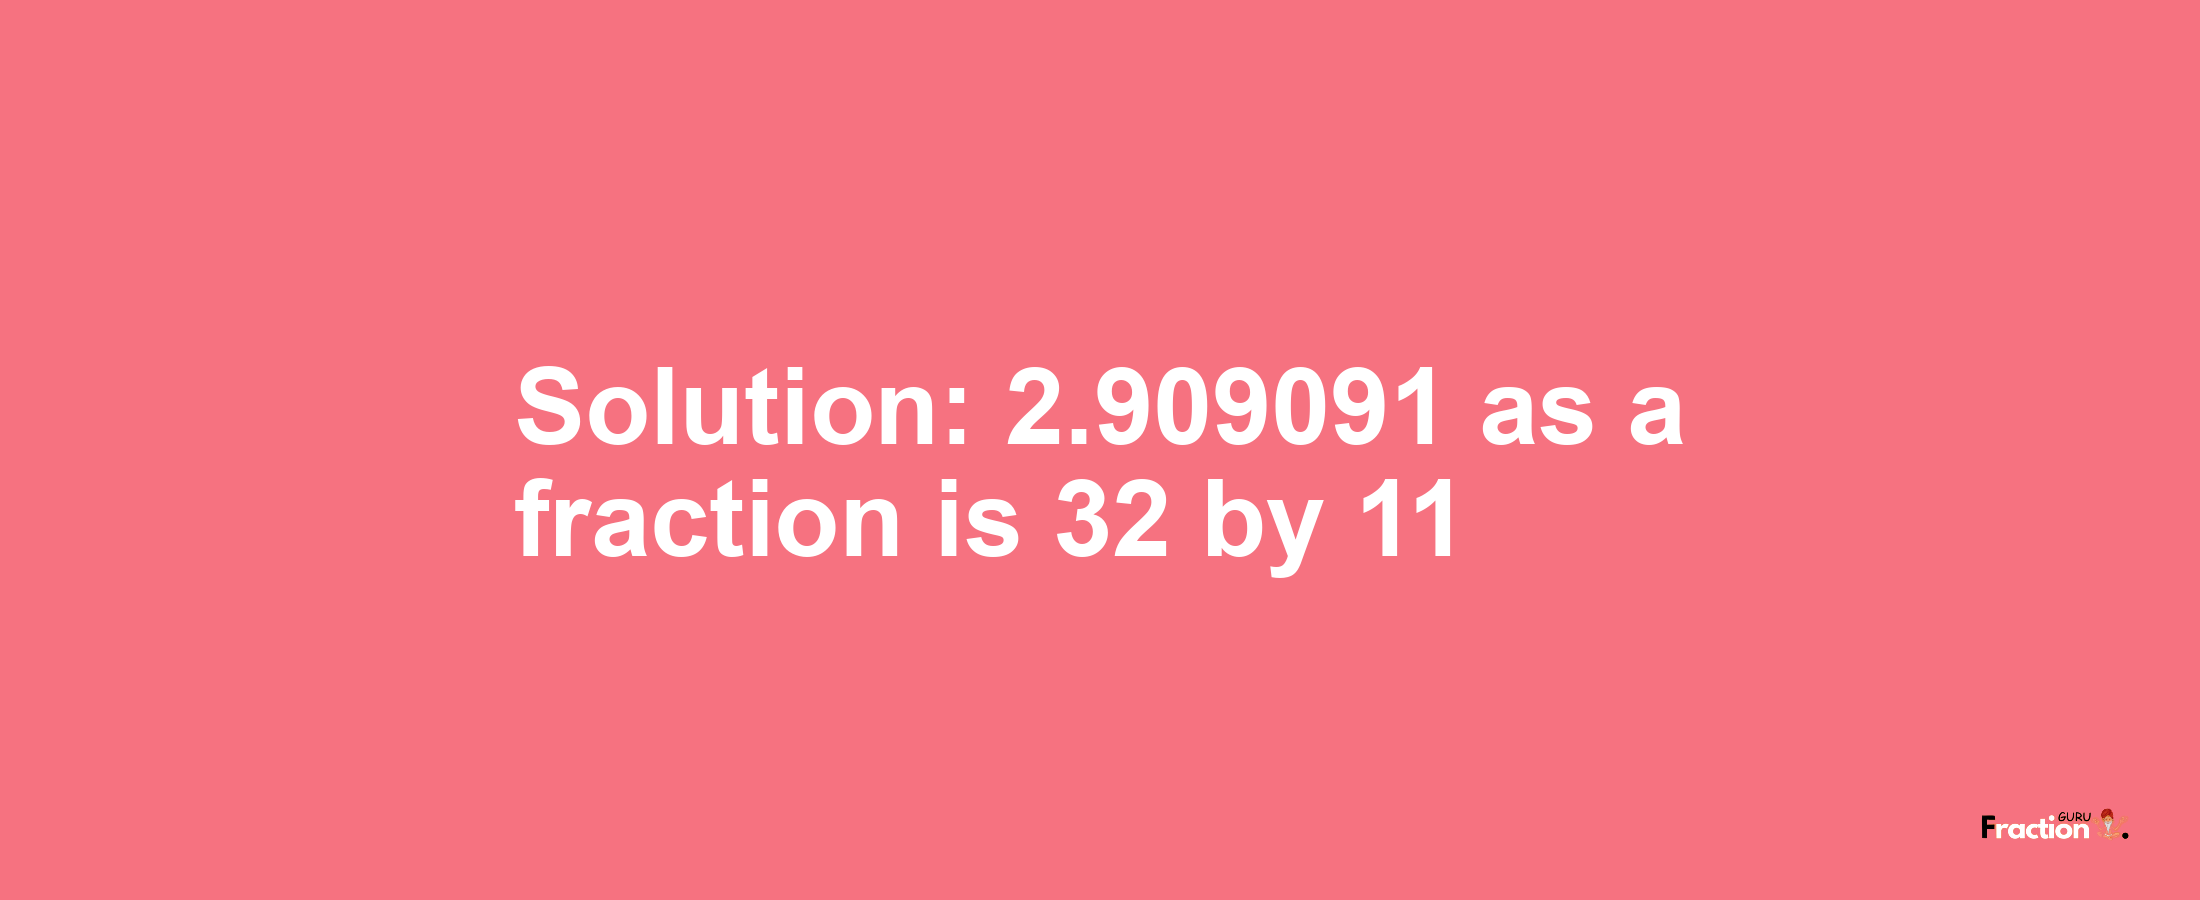 Solution:2.909091 as a fraction is 32/11